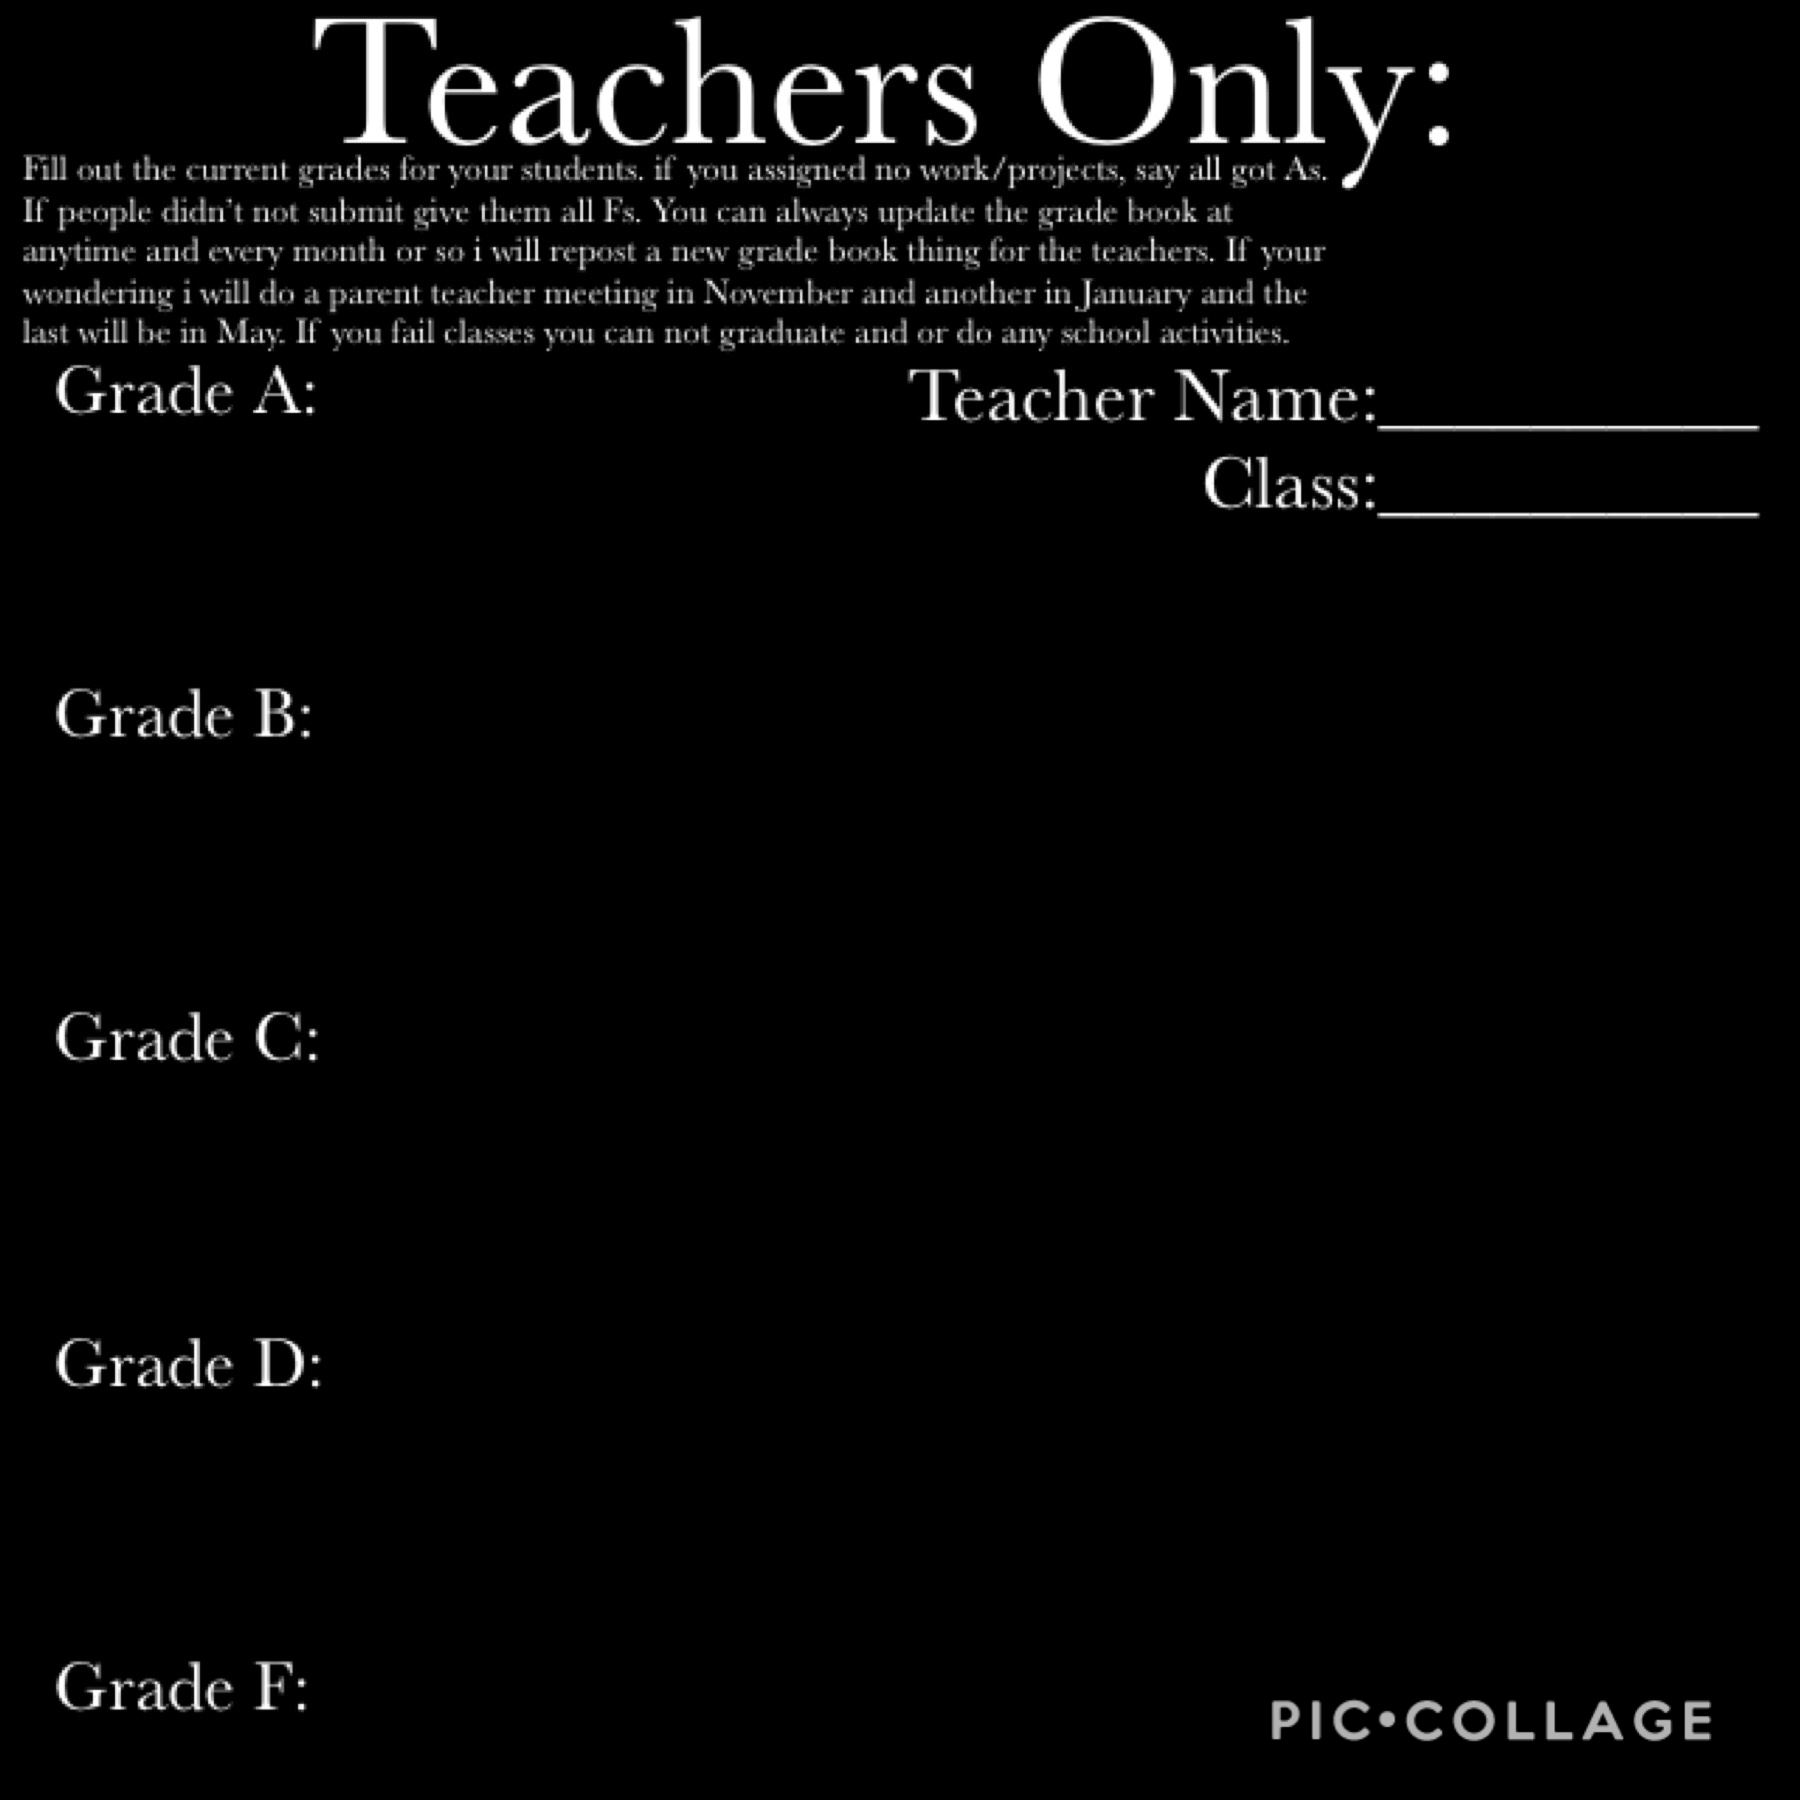 FOR ONLY THE TEACHERS, UPDATE IT AS MUCH AS YOU WANT TILL A POST ANOTHER, ALSO PLEASE READ THE TEXT! MORE INFO COMING SOON ABOUT TEACHER MEETINGS & ETC. 